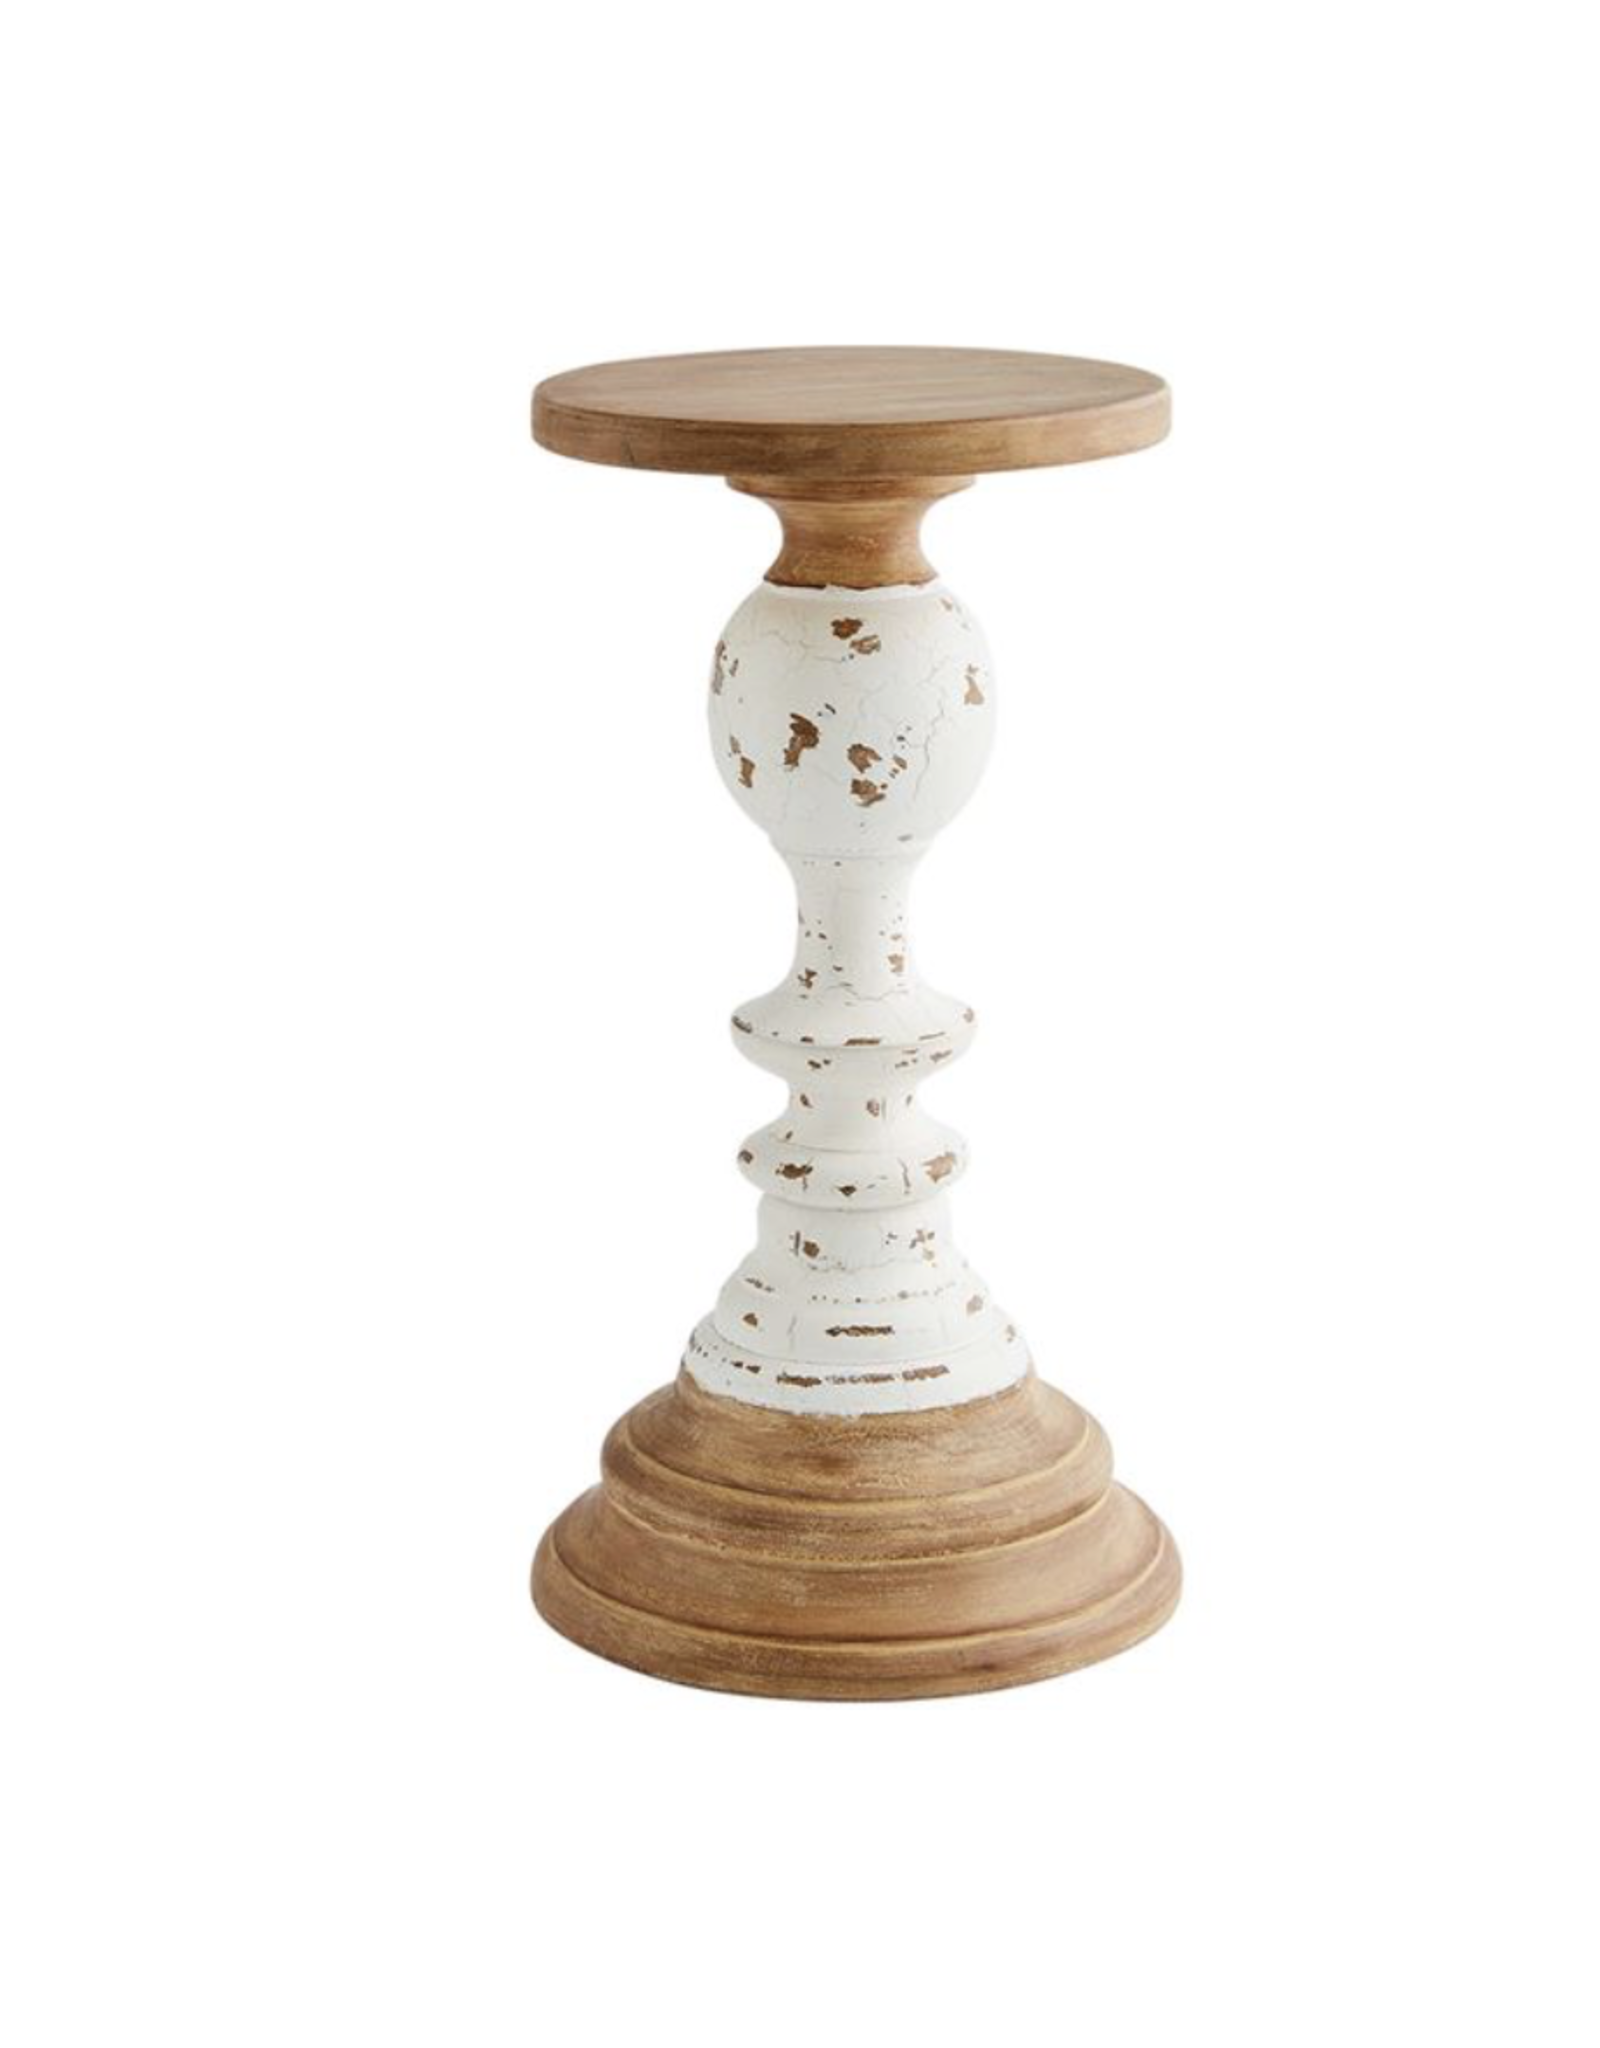 Mud Pie Candlestick Wooden Rustic LG